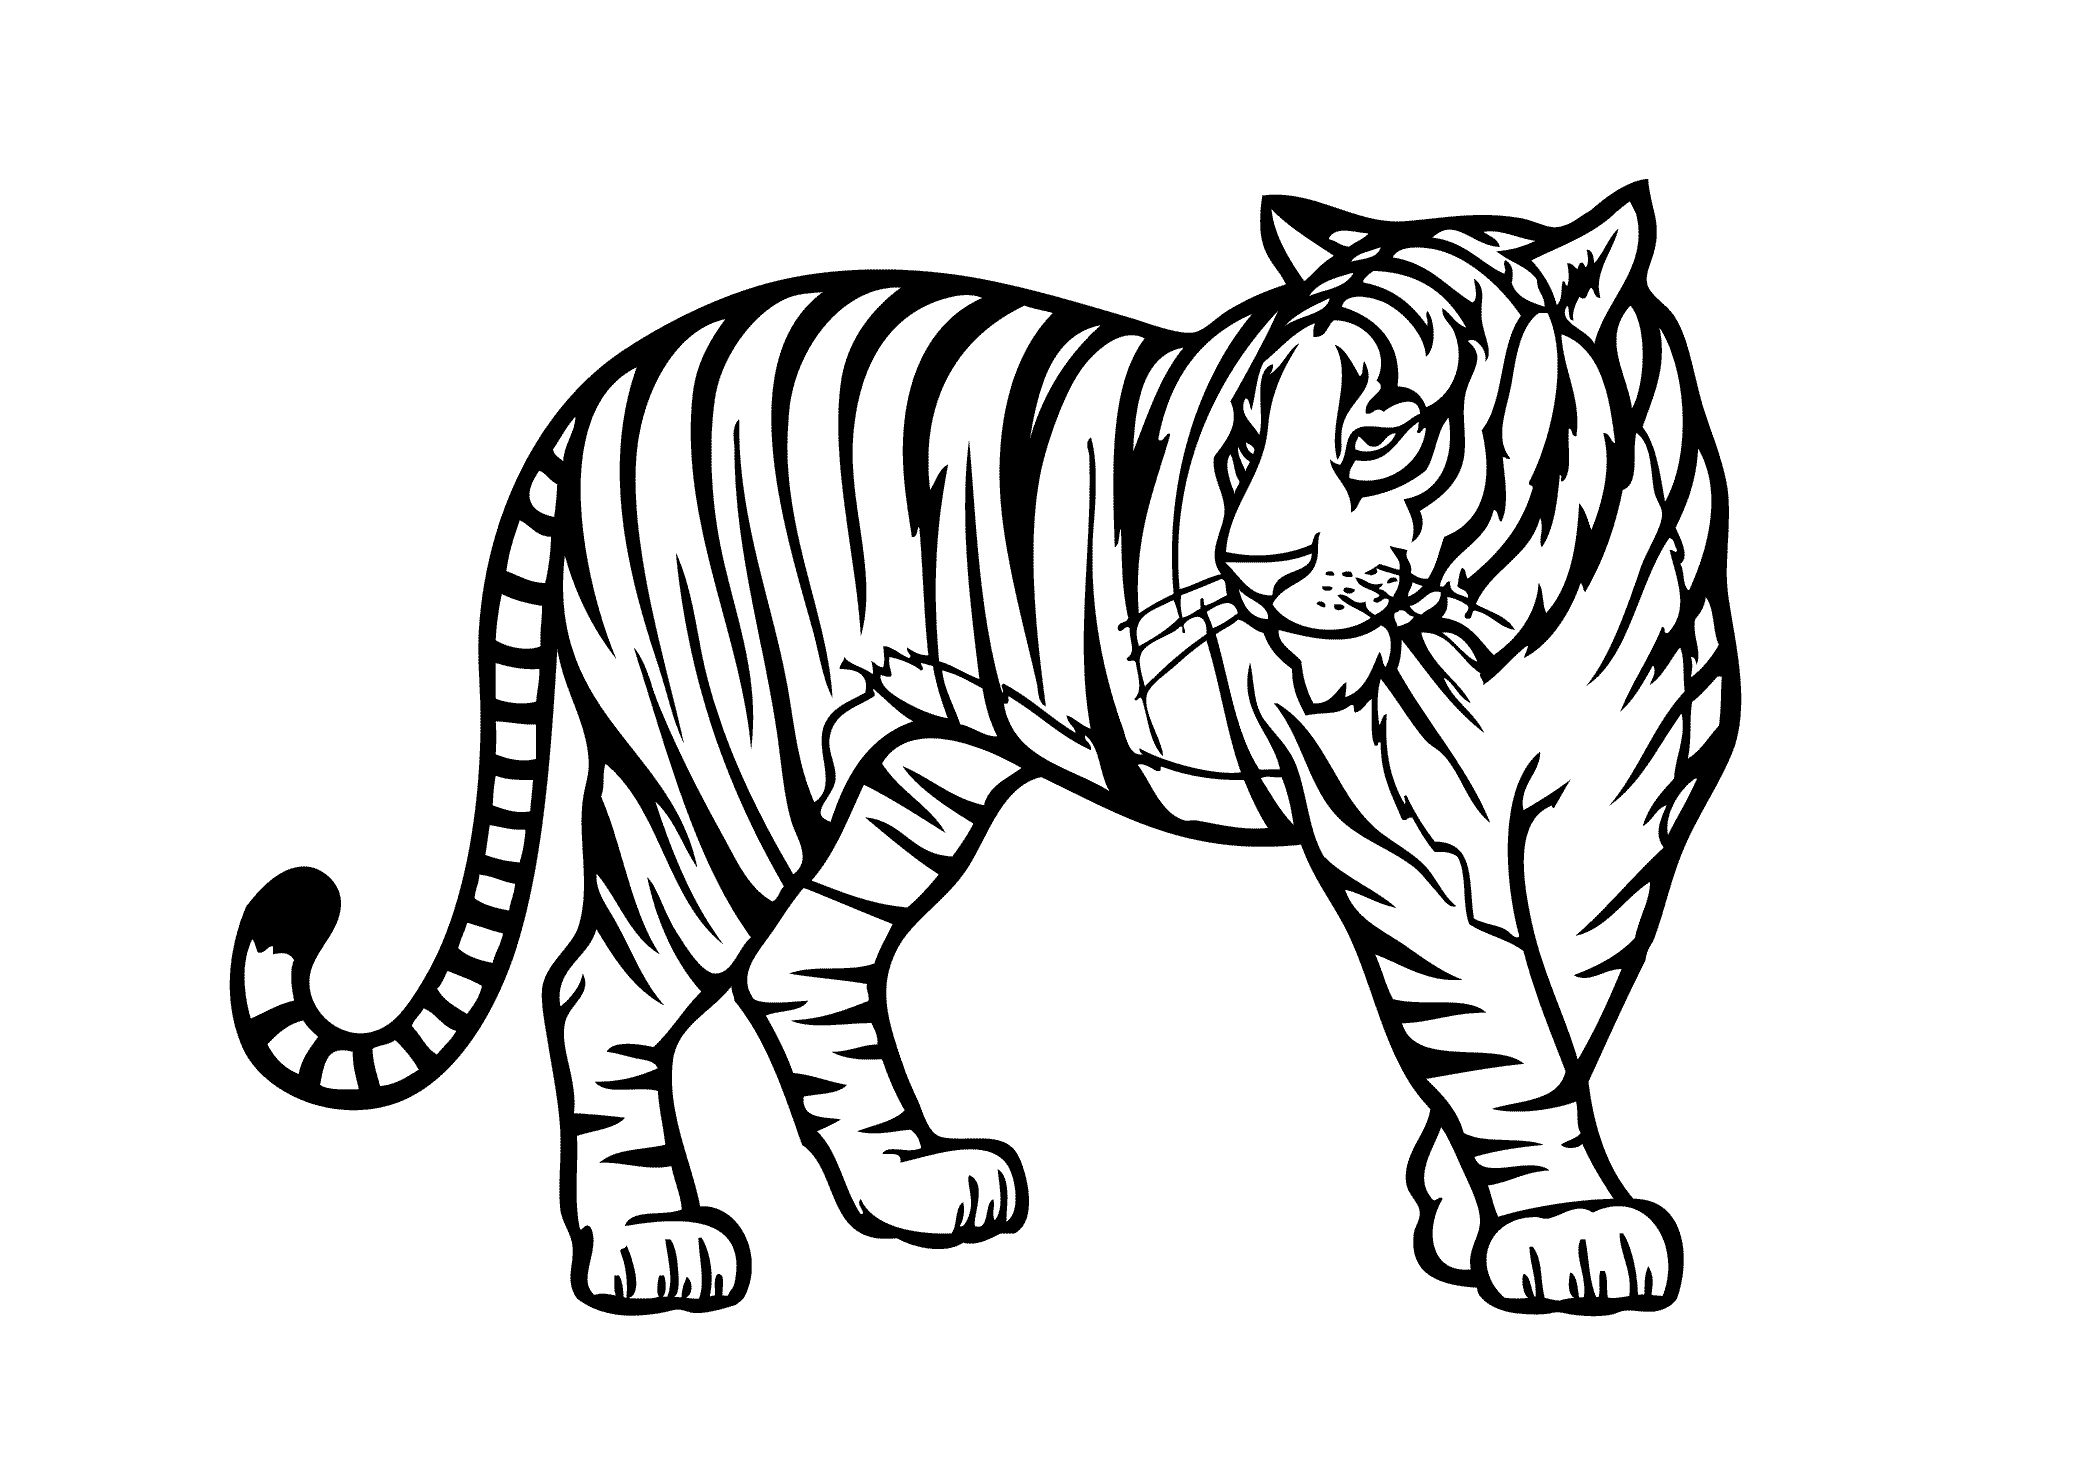 Tiger Coloring Pages - FREE Printable Coloring Pages | AngelDesign